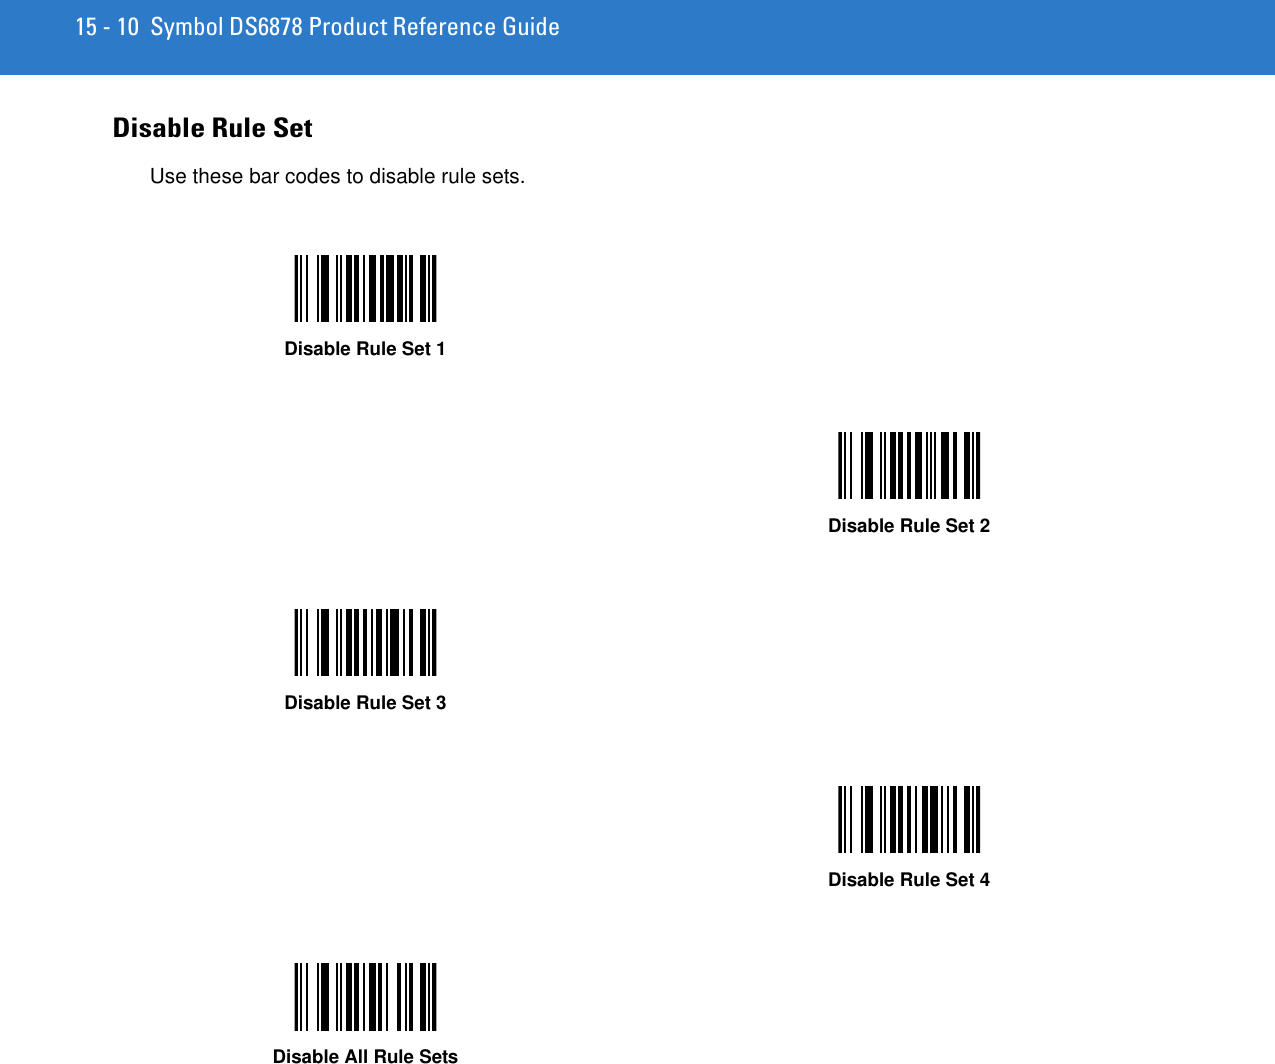 15 - 10 Symbol DS6878 Product Reference GuideDisable Rule SetUse these bar codes to disable rule sets.Disable Rule Set 1Disable Rule Set 2Disable Rule Set 3Disable Rule Set 4Disable All Rule Sets